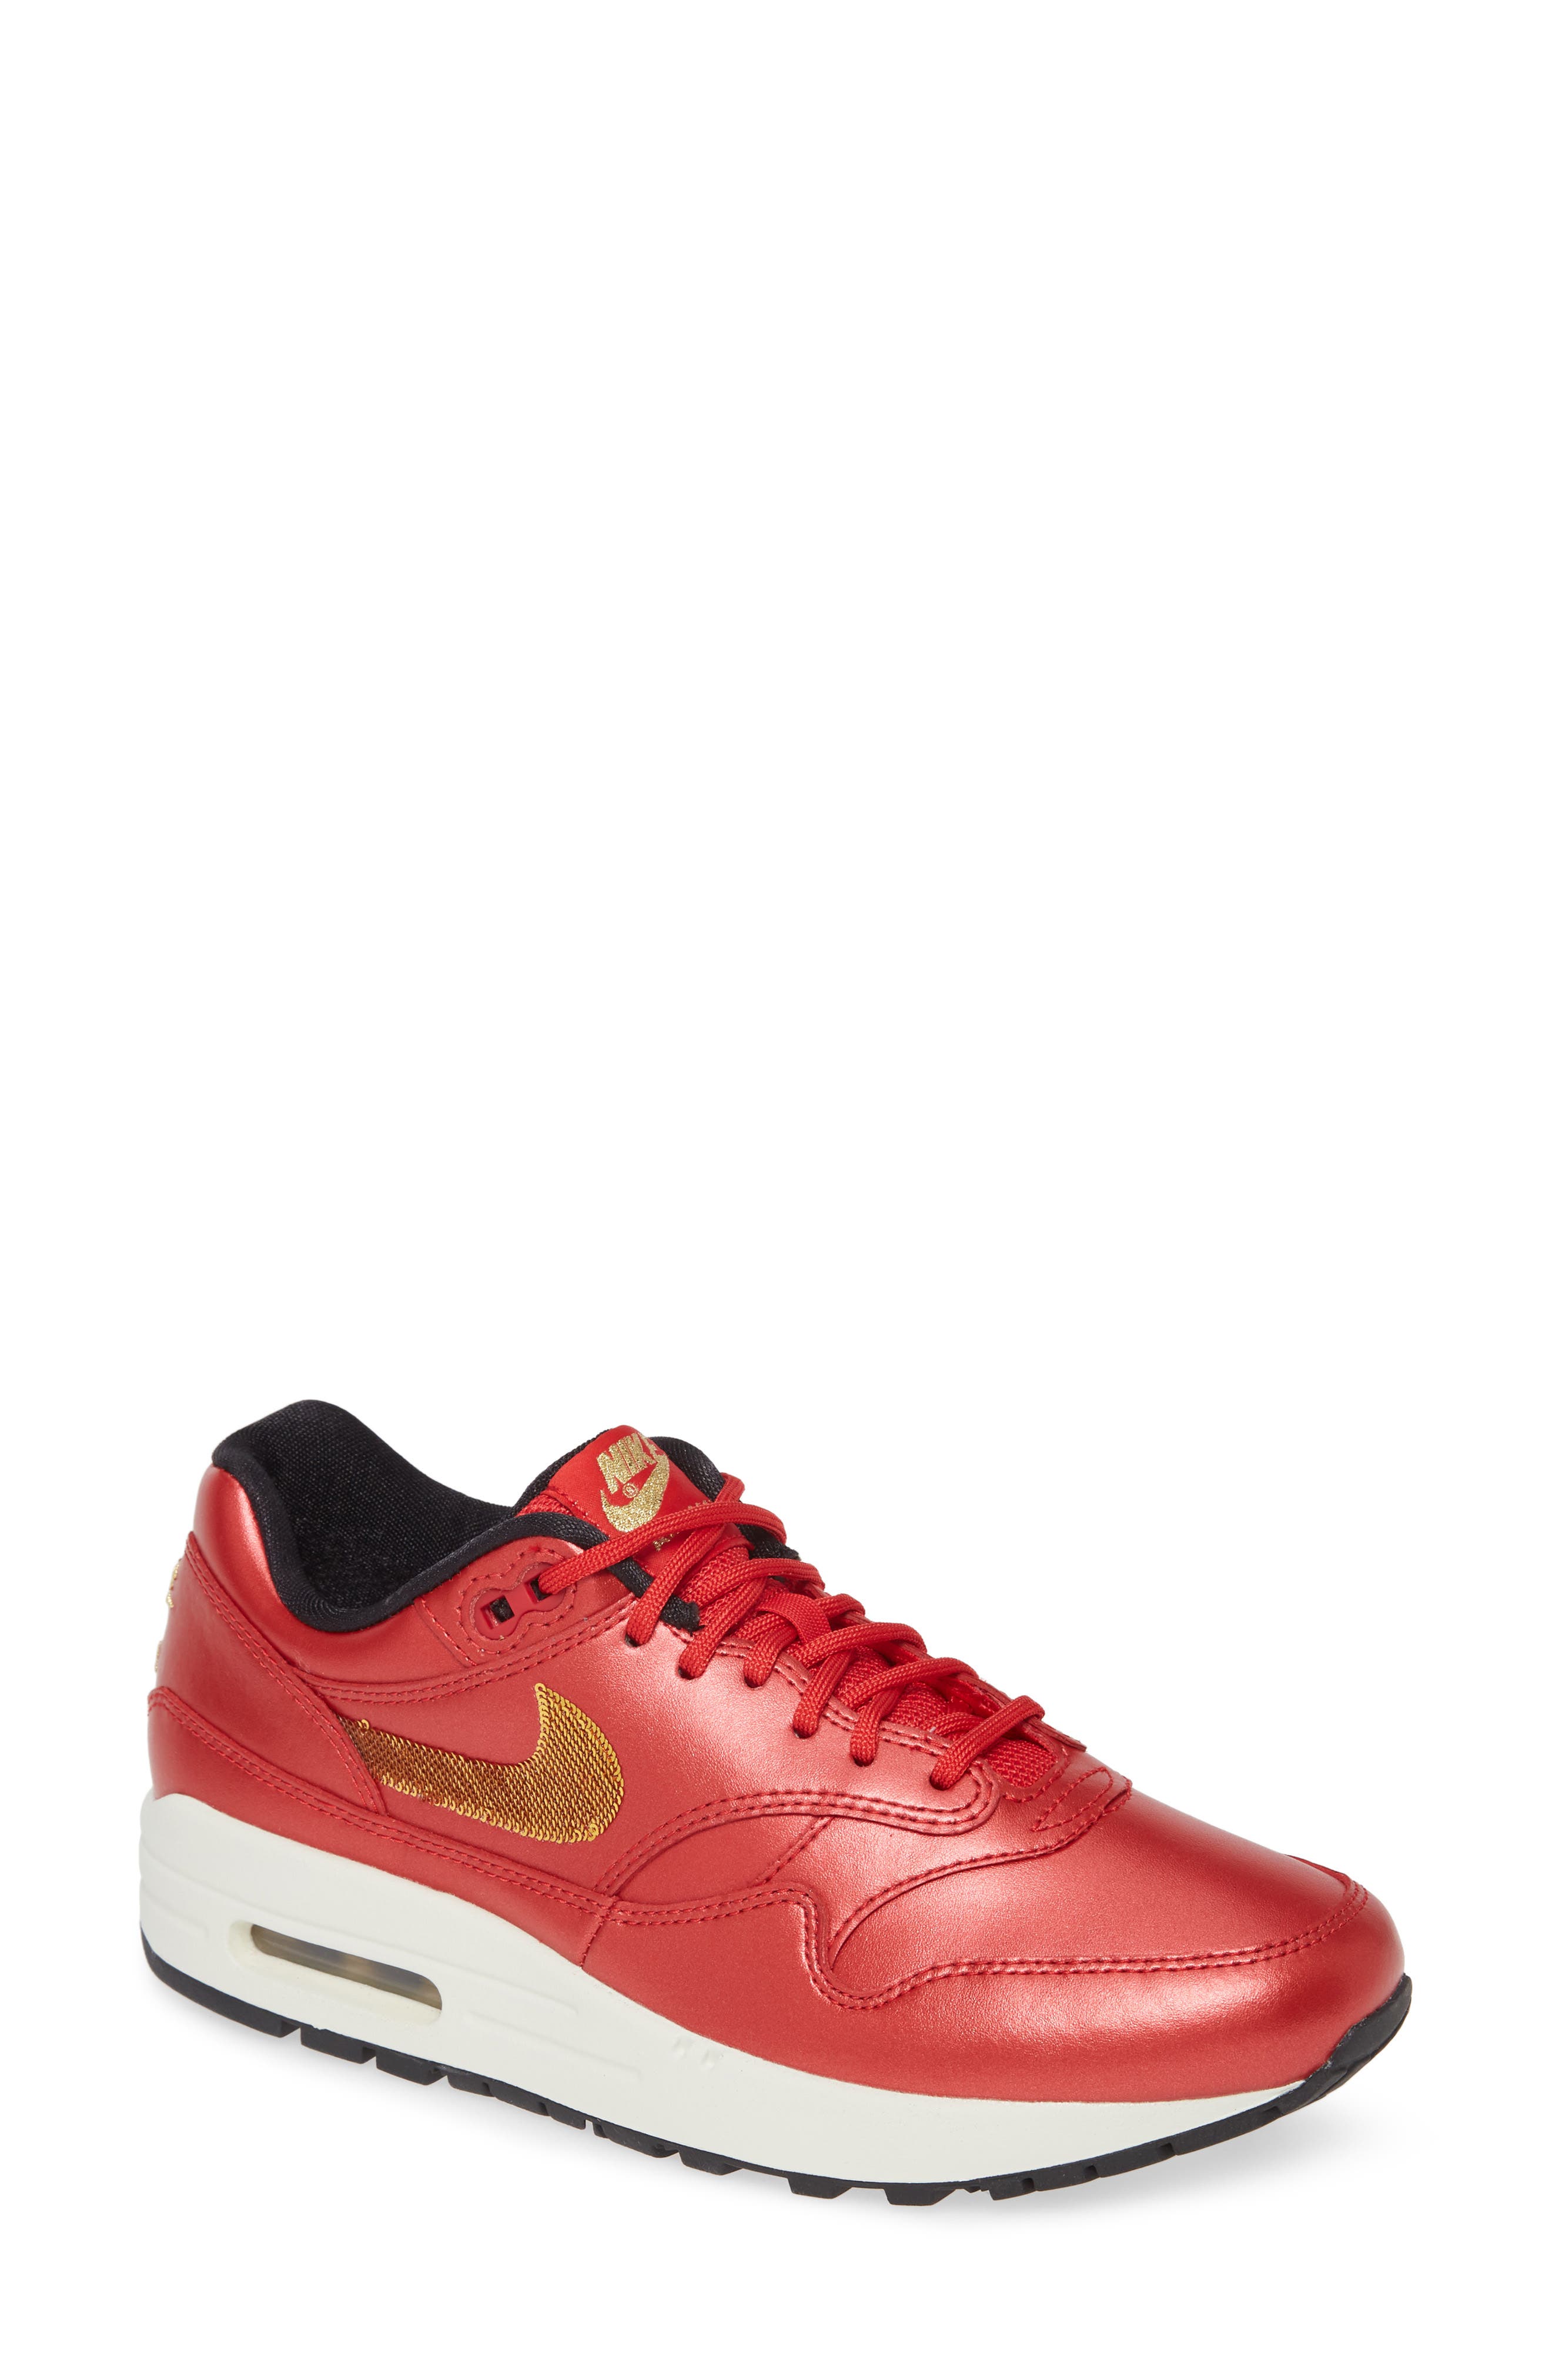 gold and red nikes